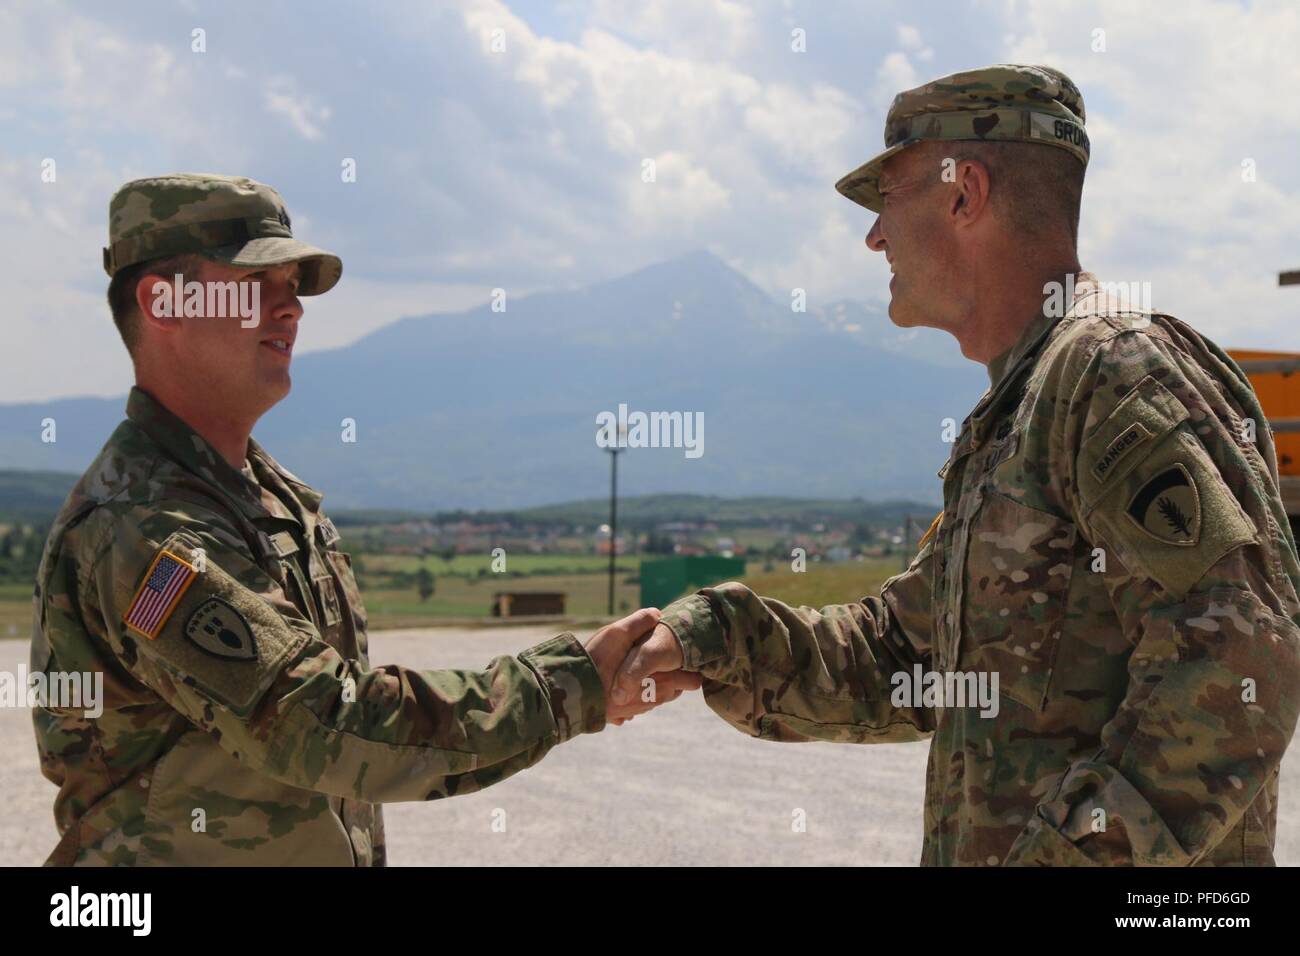 CAMP BONDSTEEL, Kosovo — Maj. Gen. John Gronski, Deputy Commanding General, Army National Guard, United States Army Europe awards a coin to Sgt. Joshua Abbott for his exemplary service with the 702nd Ordnance Company – EOD as an Explosive Ordnance Team Member, June 5. Sgt. Abbott’s contribution to the elimination of unexploded ordnance in Kosovo helps ensure the safety of the people here. Stock Photo